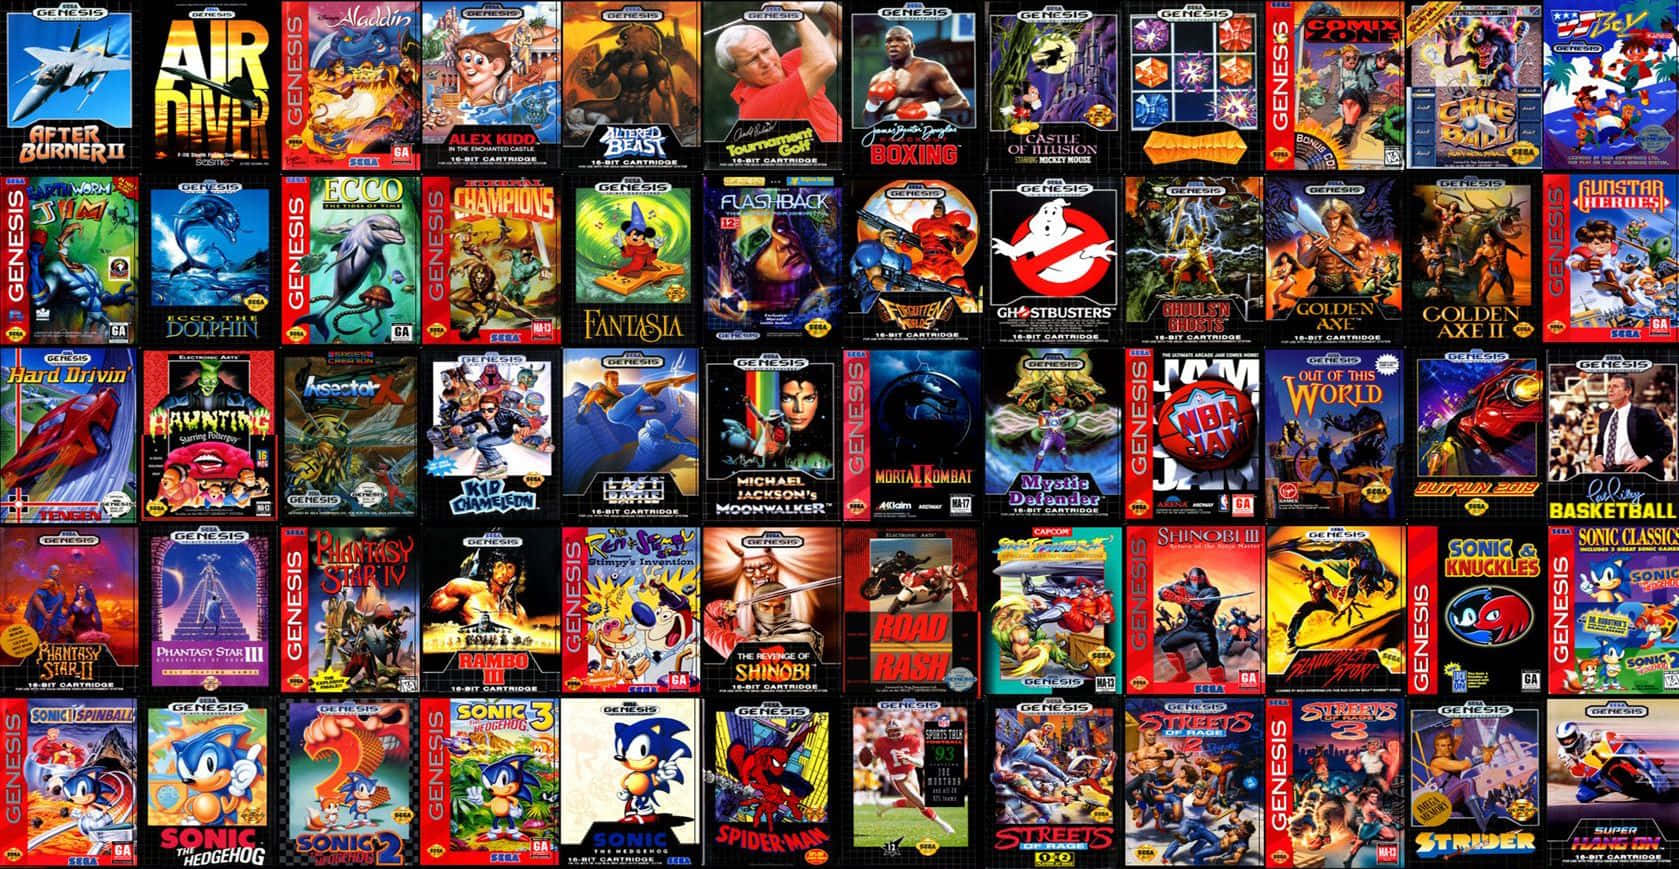 Enjoy the classic gaming experience anytime with the Gaming Classic Collections. Wallpaper